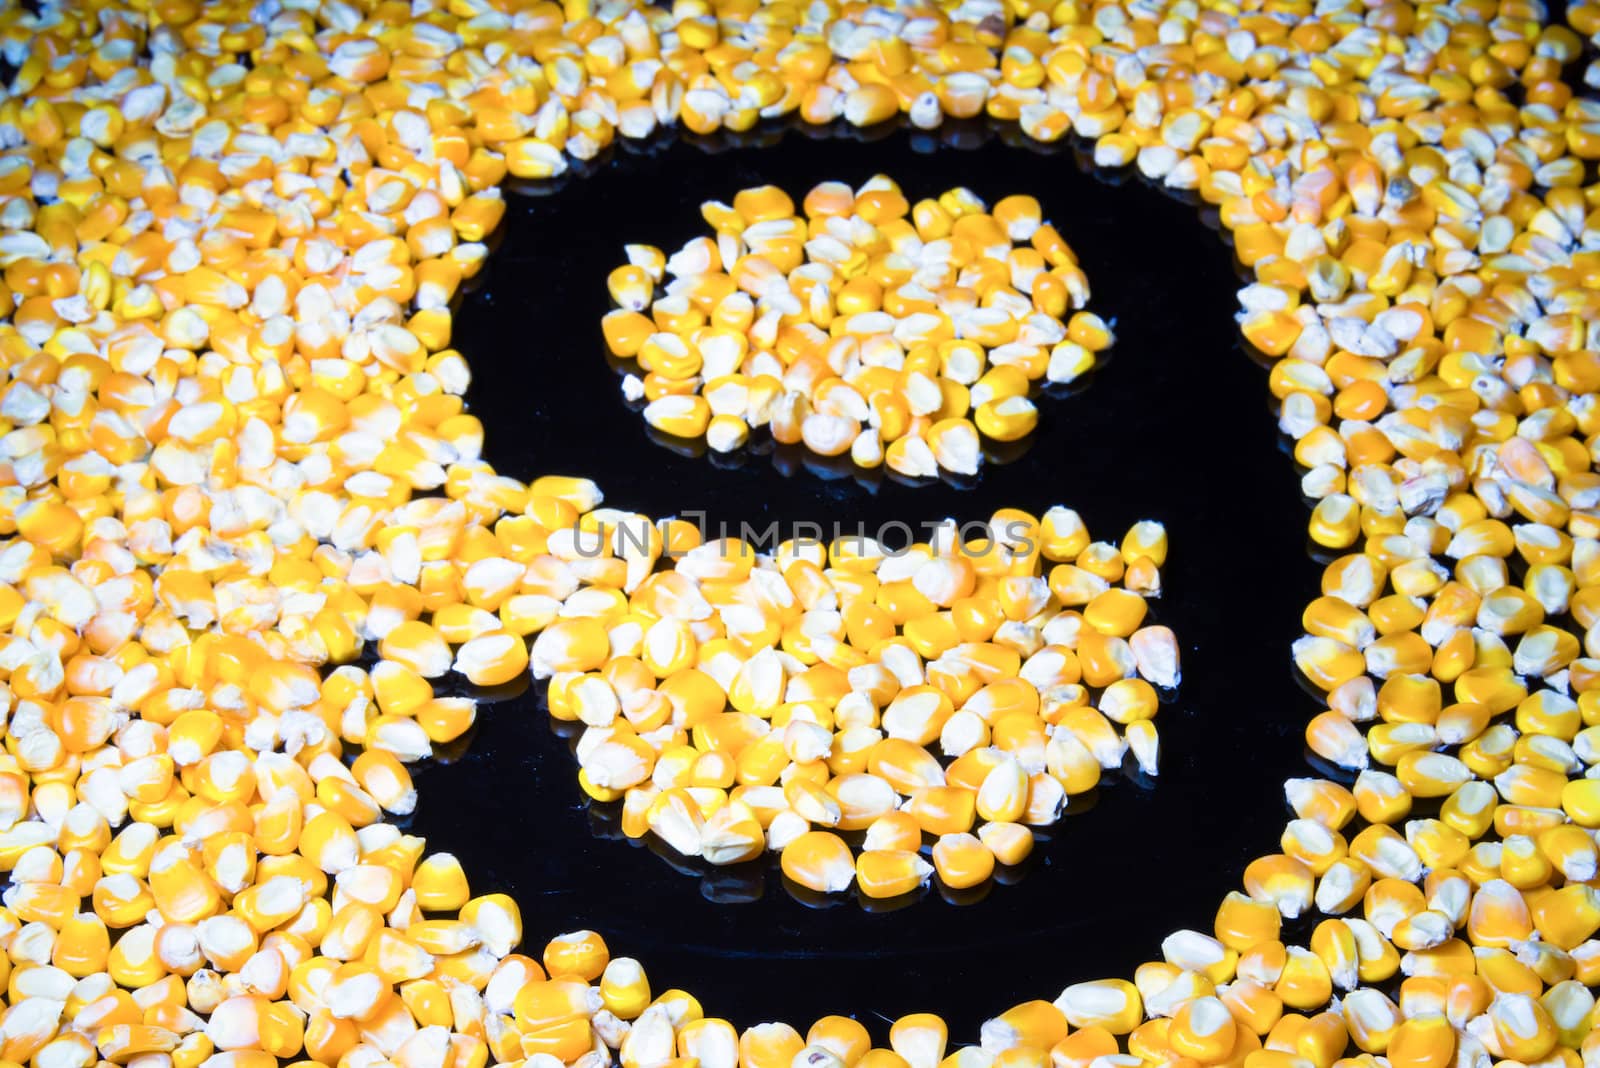 Corn made ​​the number nine on a black background.